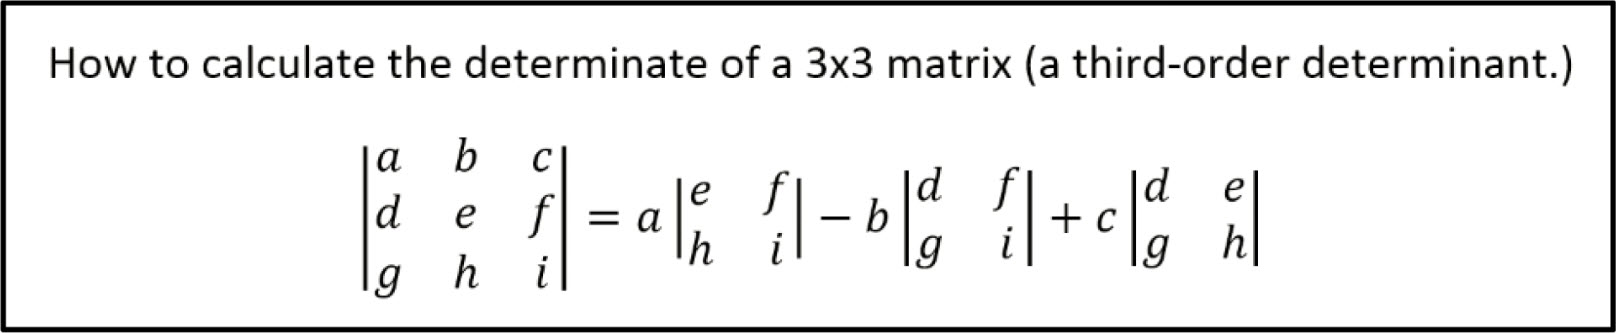 Notes for Determinant of a 3x3 Matrix